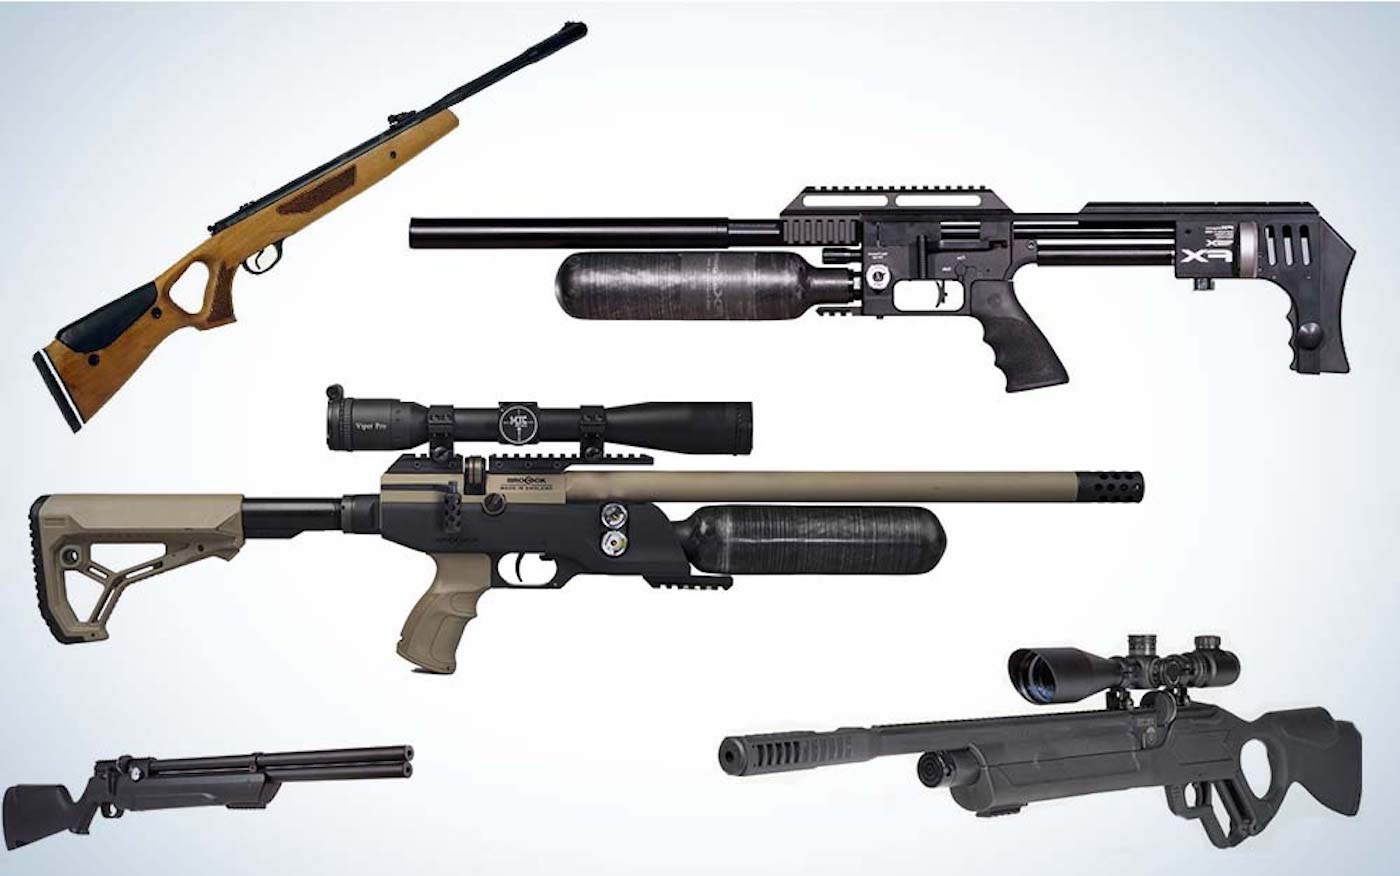 The Best .22 Air Rifles for Hunting, Competition, and Backyard Shooting